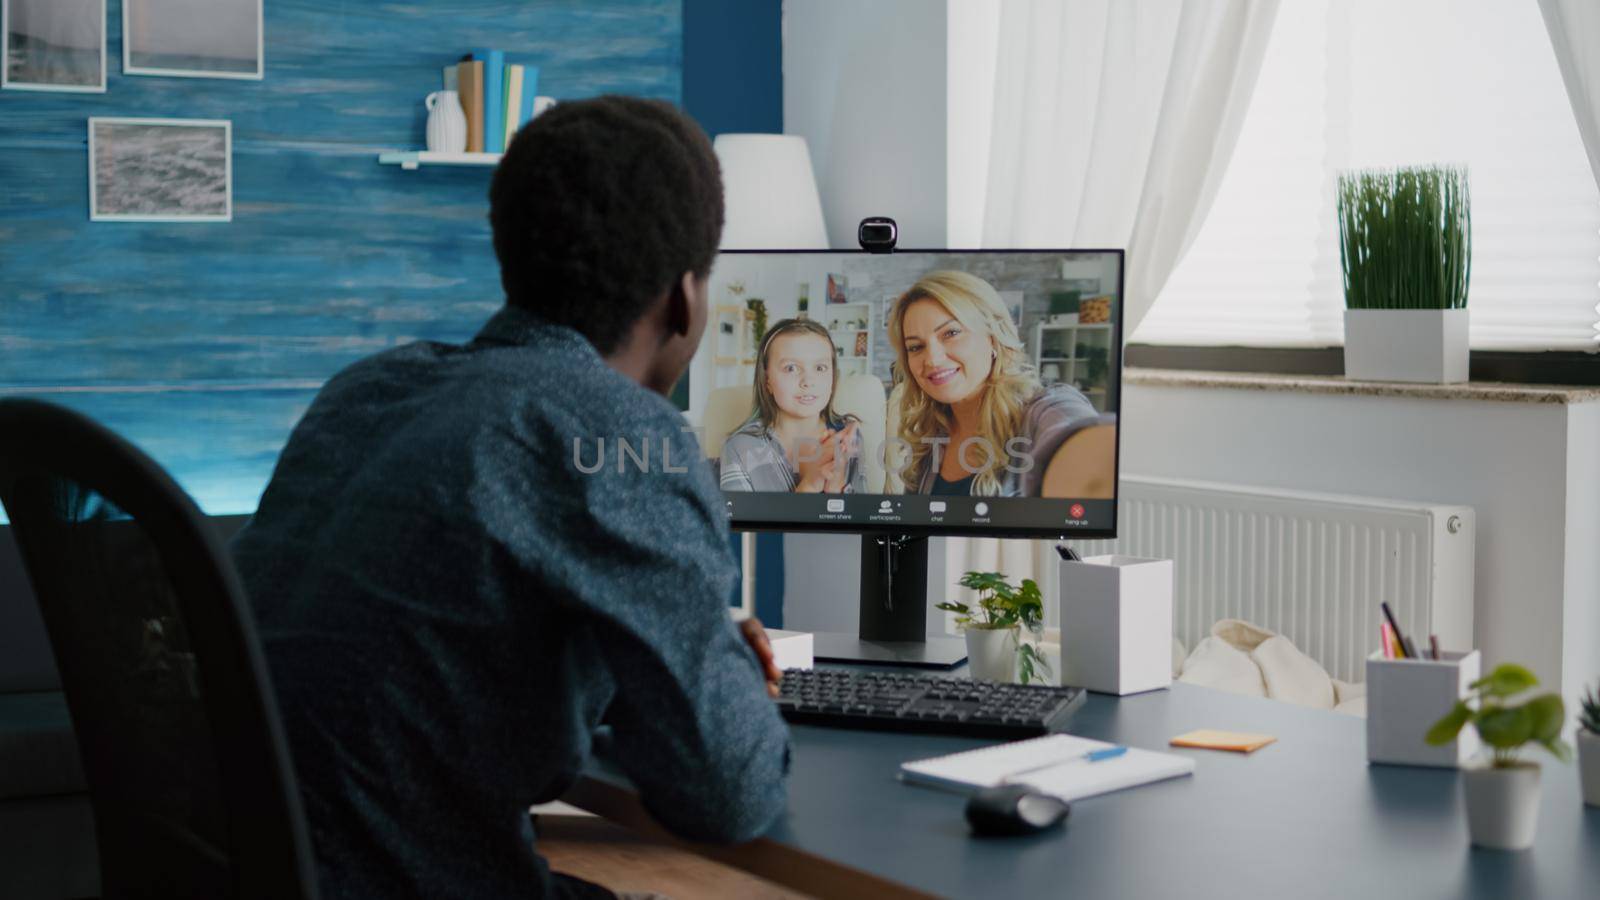 African american man talking with friends and family using online video call communication and webcam. Black man video conference from home office, remote intenet chat conversation